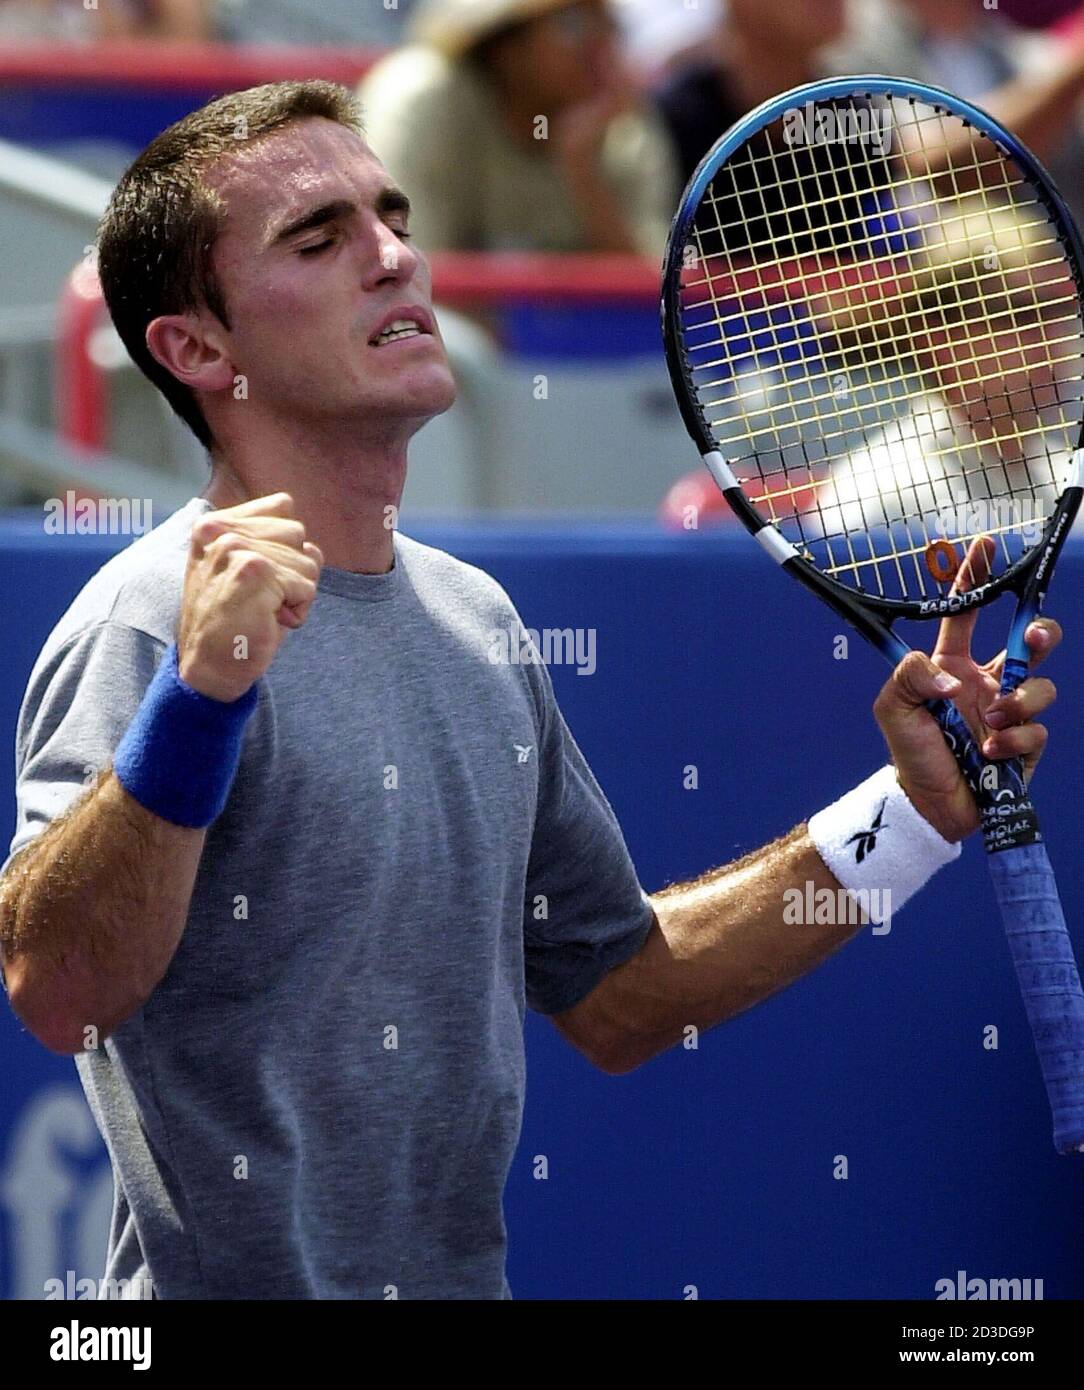 Alberto Martin of Spain reacts after beating Michael Chang of the United  States during the Tennis Masters Series-Canada in Montreal on July 31,  2001. Martin beat Chang 6-2 6-3. CM Stock Photo - Alamy